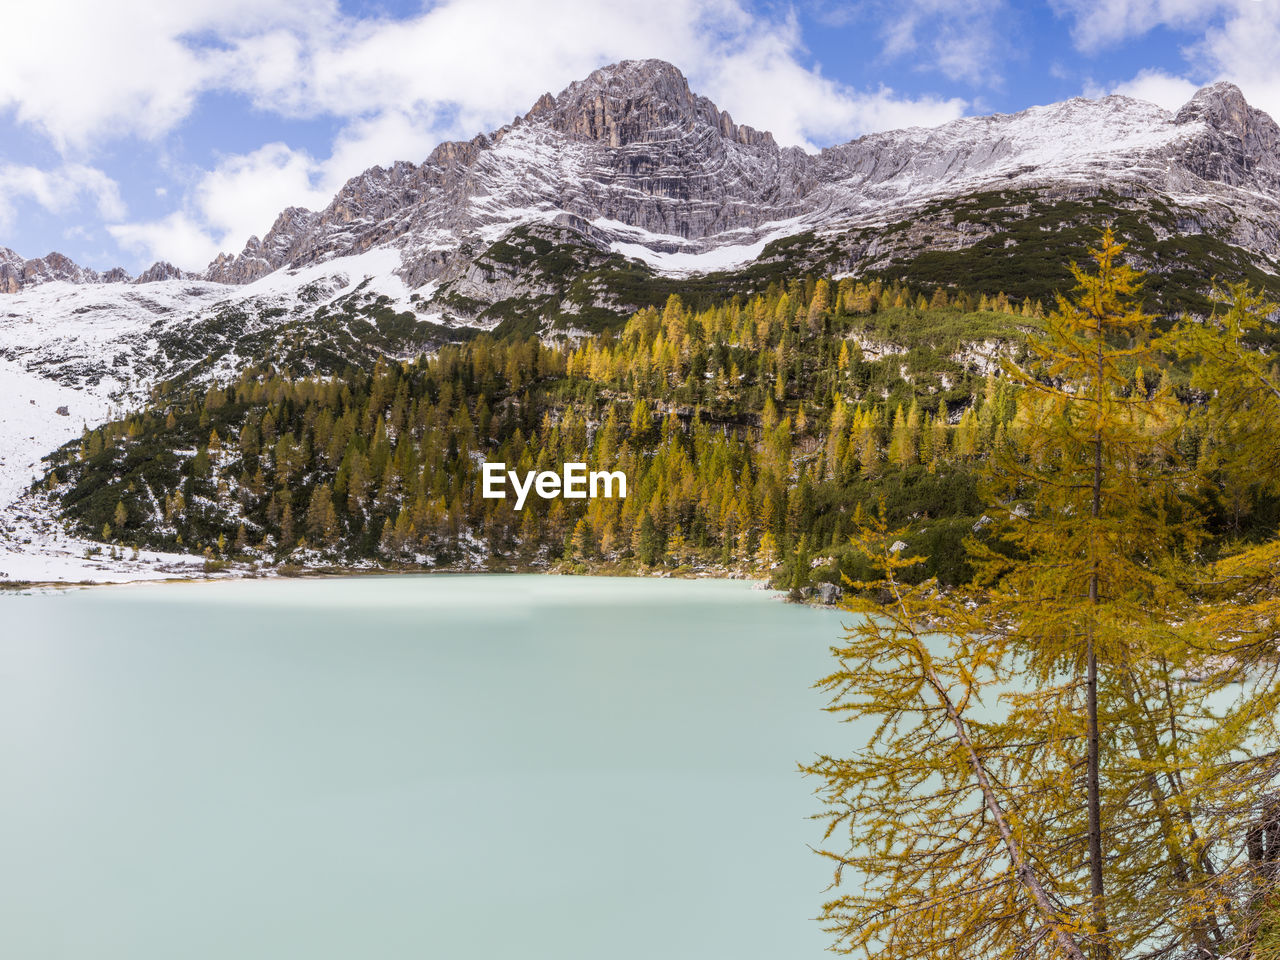 Lake sorapis in autumn with early snow in dolomites italy